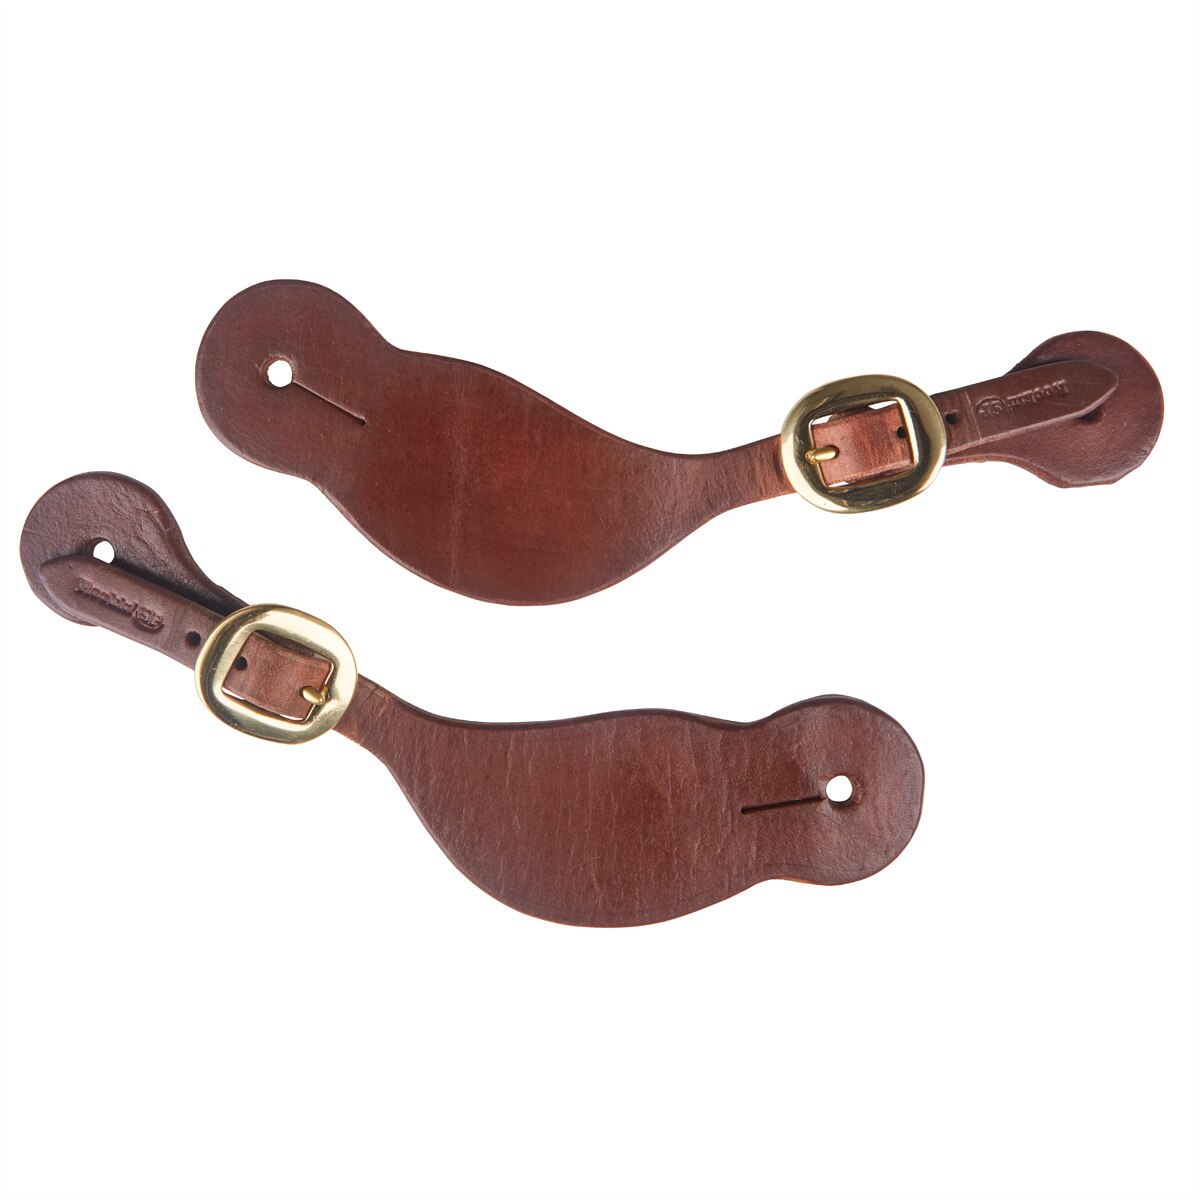 Western Leather Spur Straps with Zebra print Pair Adjustable